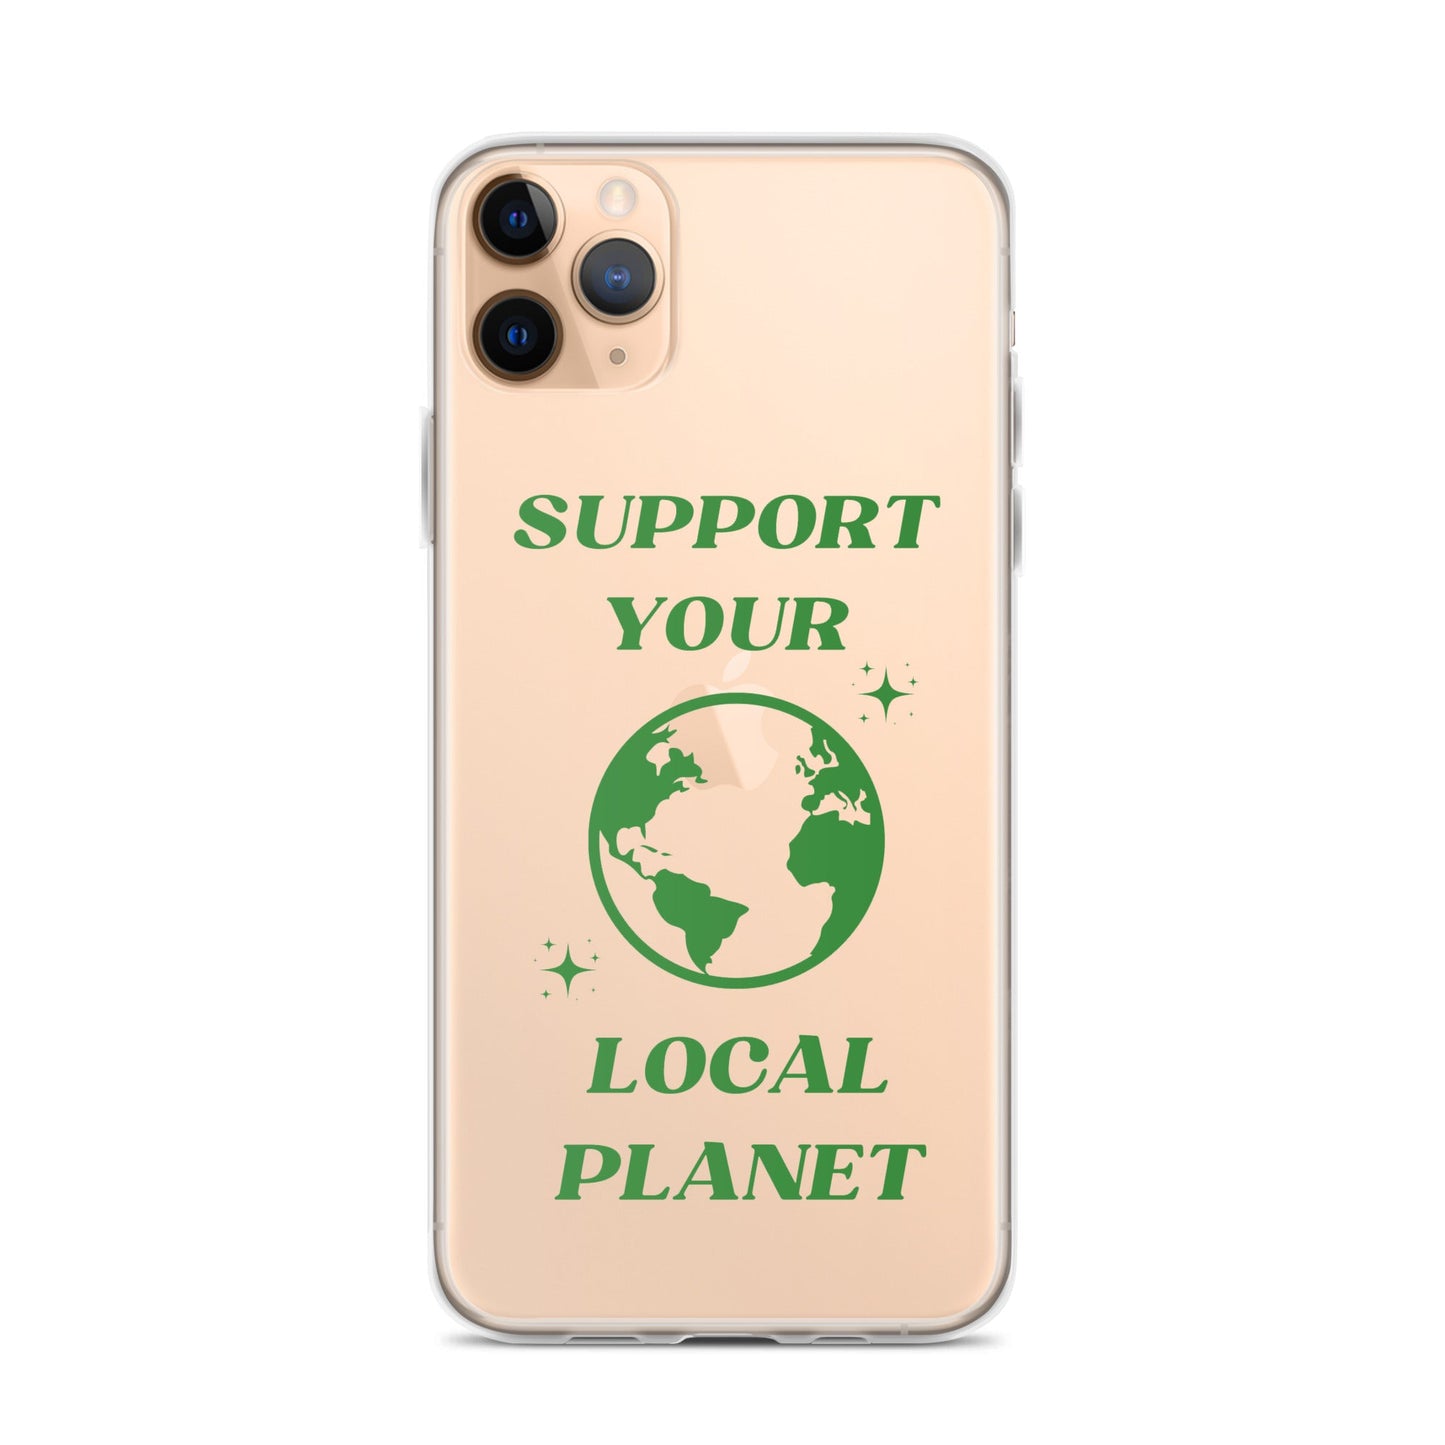 Planet Earth iPhone Case - blunt cases